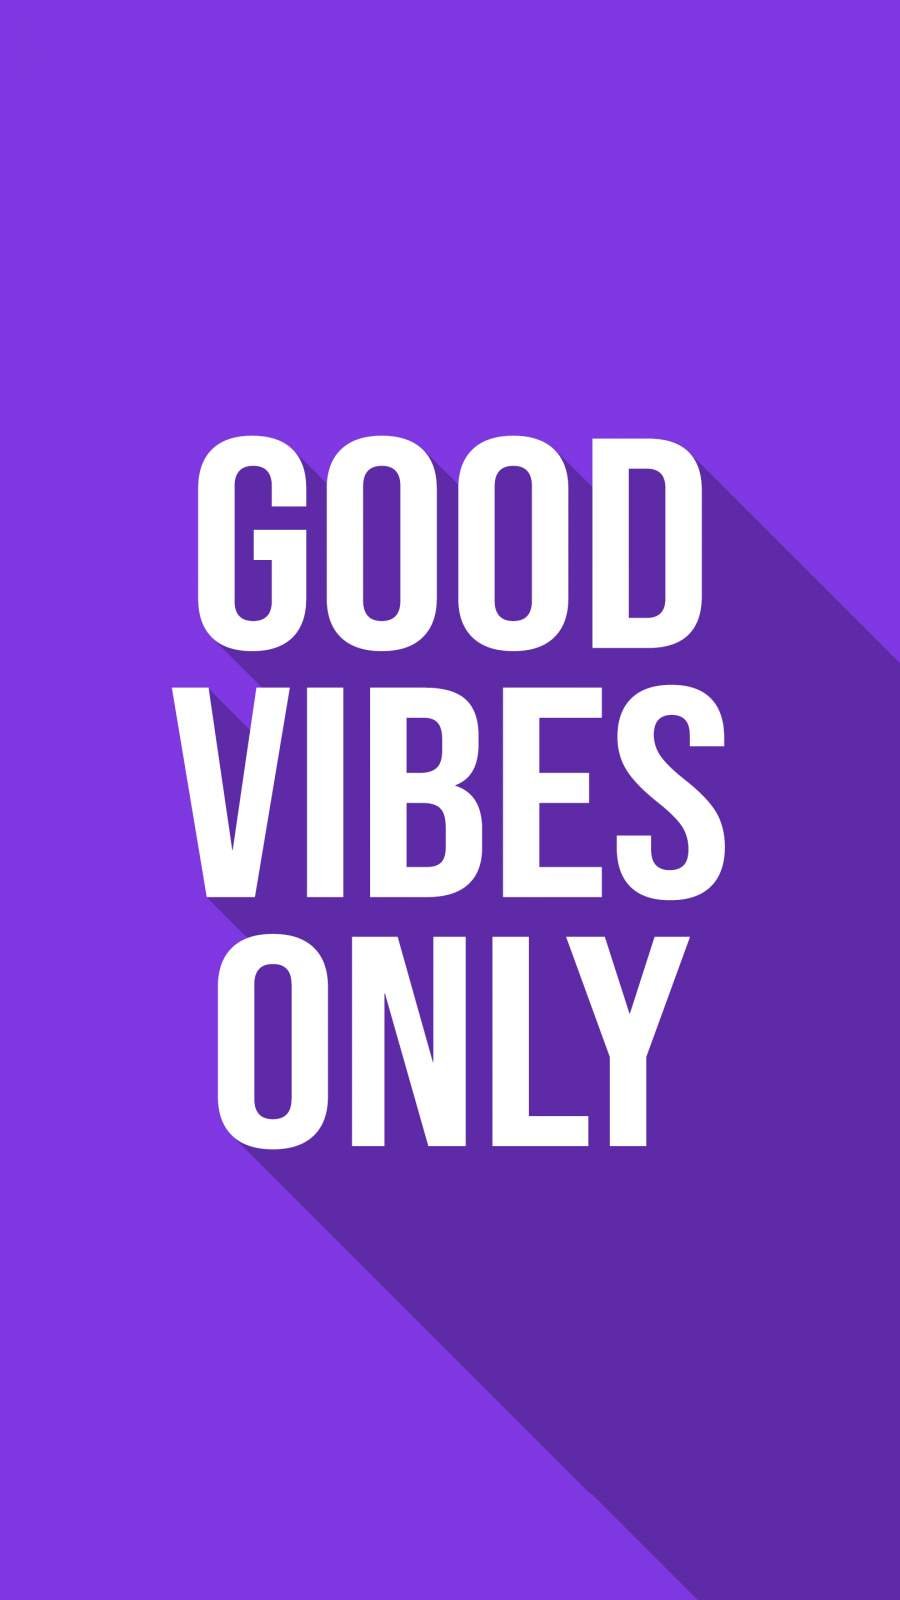 Good vibes only  Good vibes wallpaper, Pretty wallpapers, Iphone